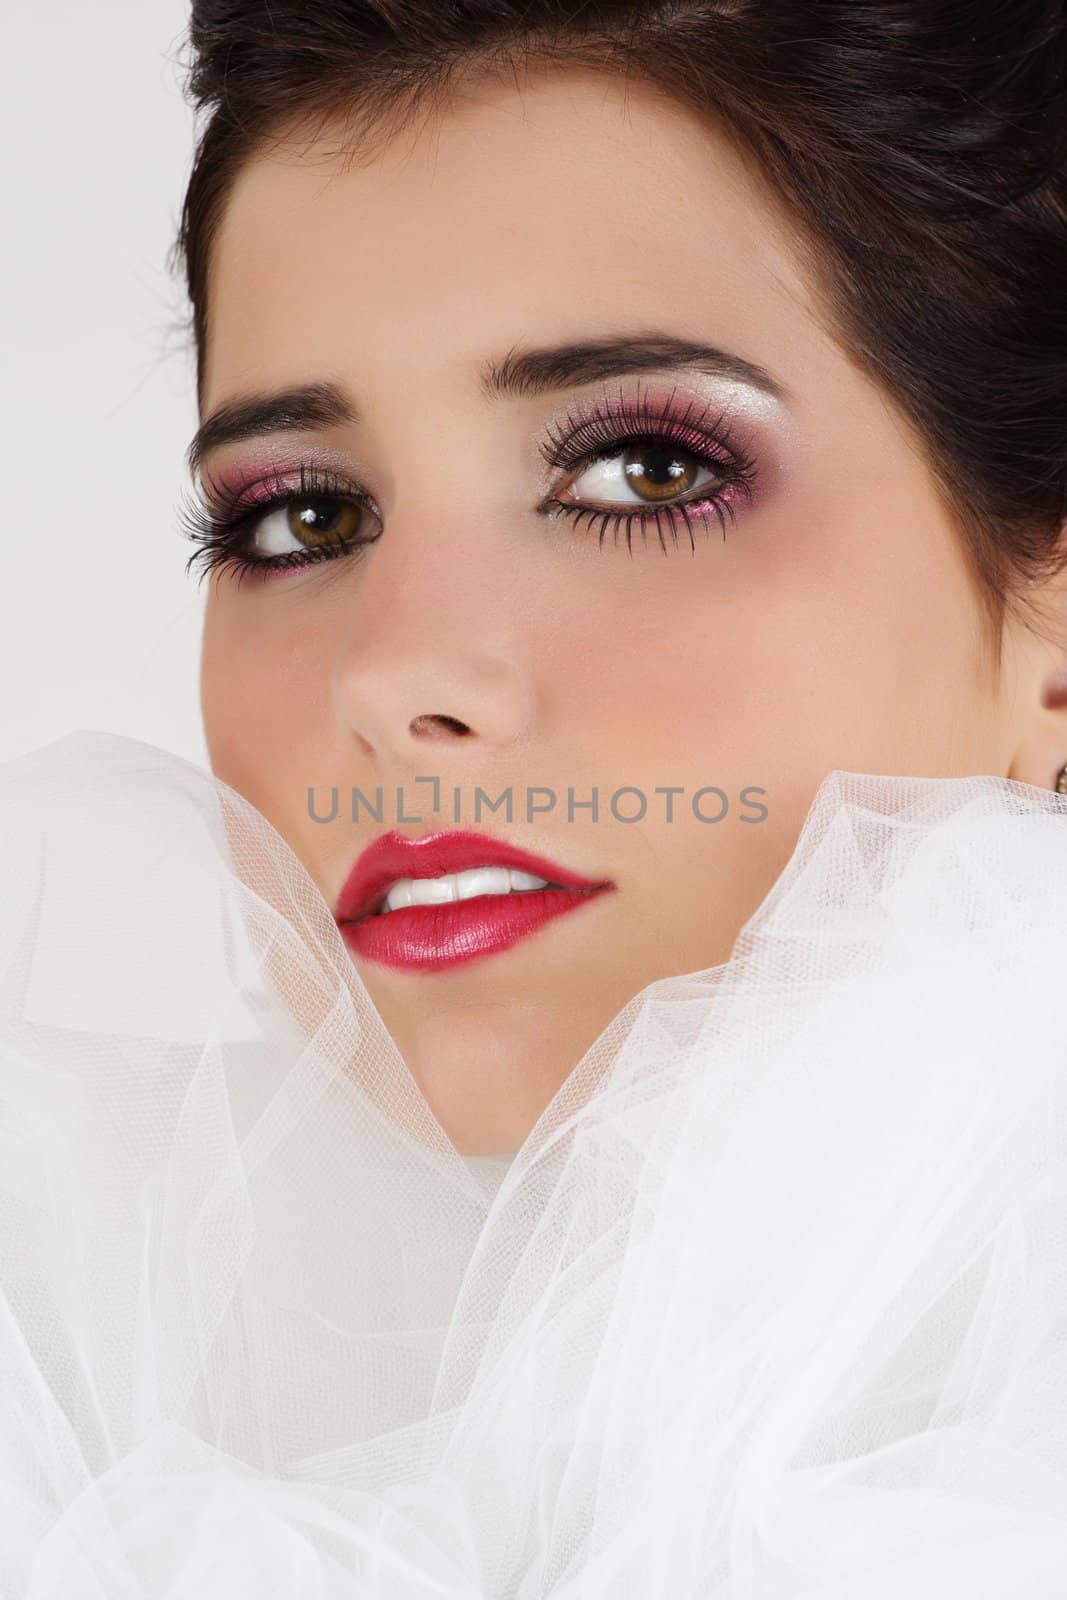 Closeup portrait of a beautiful young woman, white background with white tulle